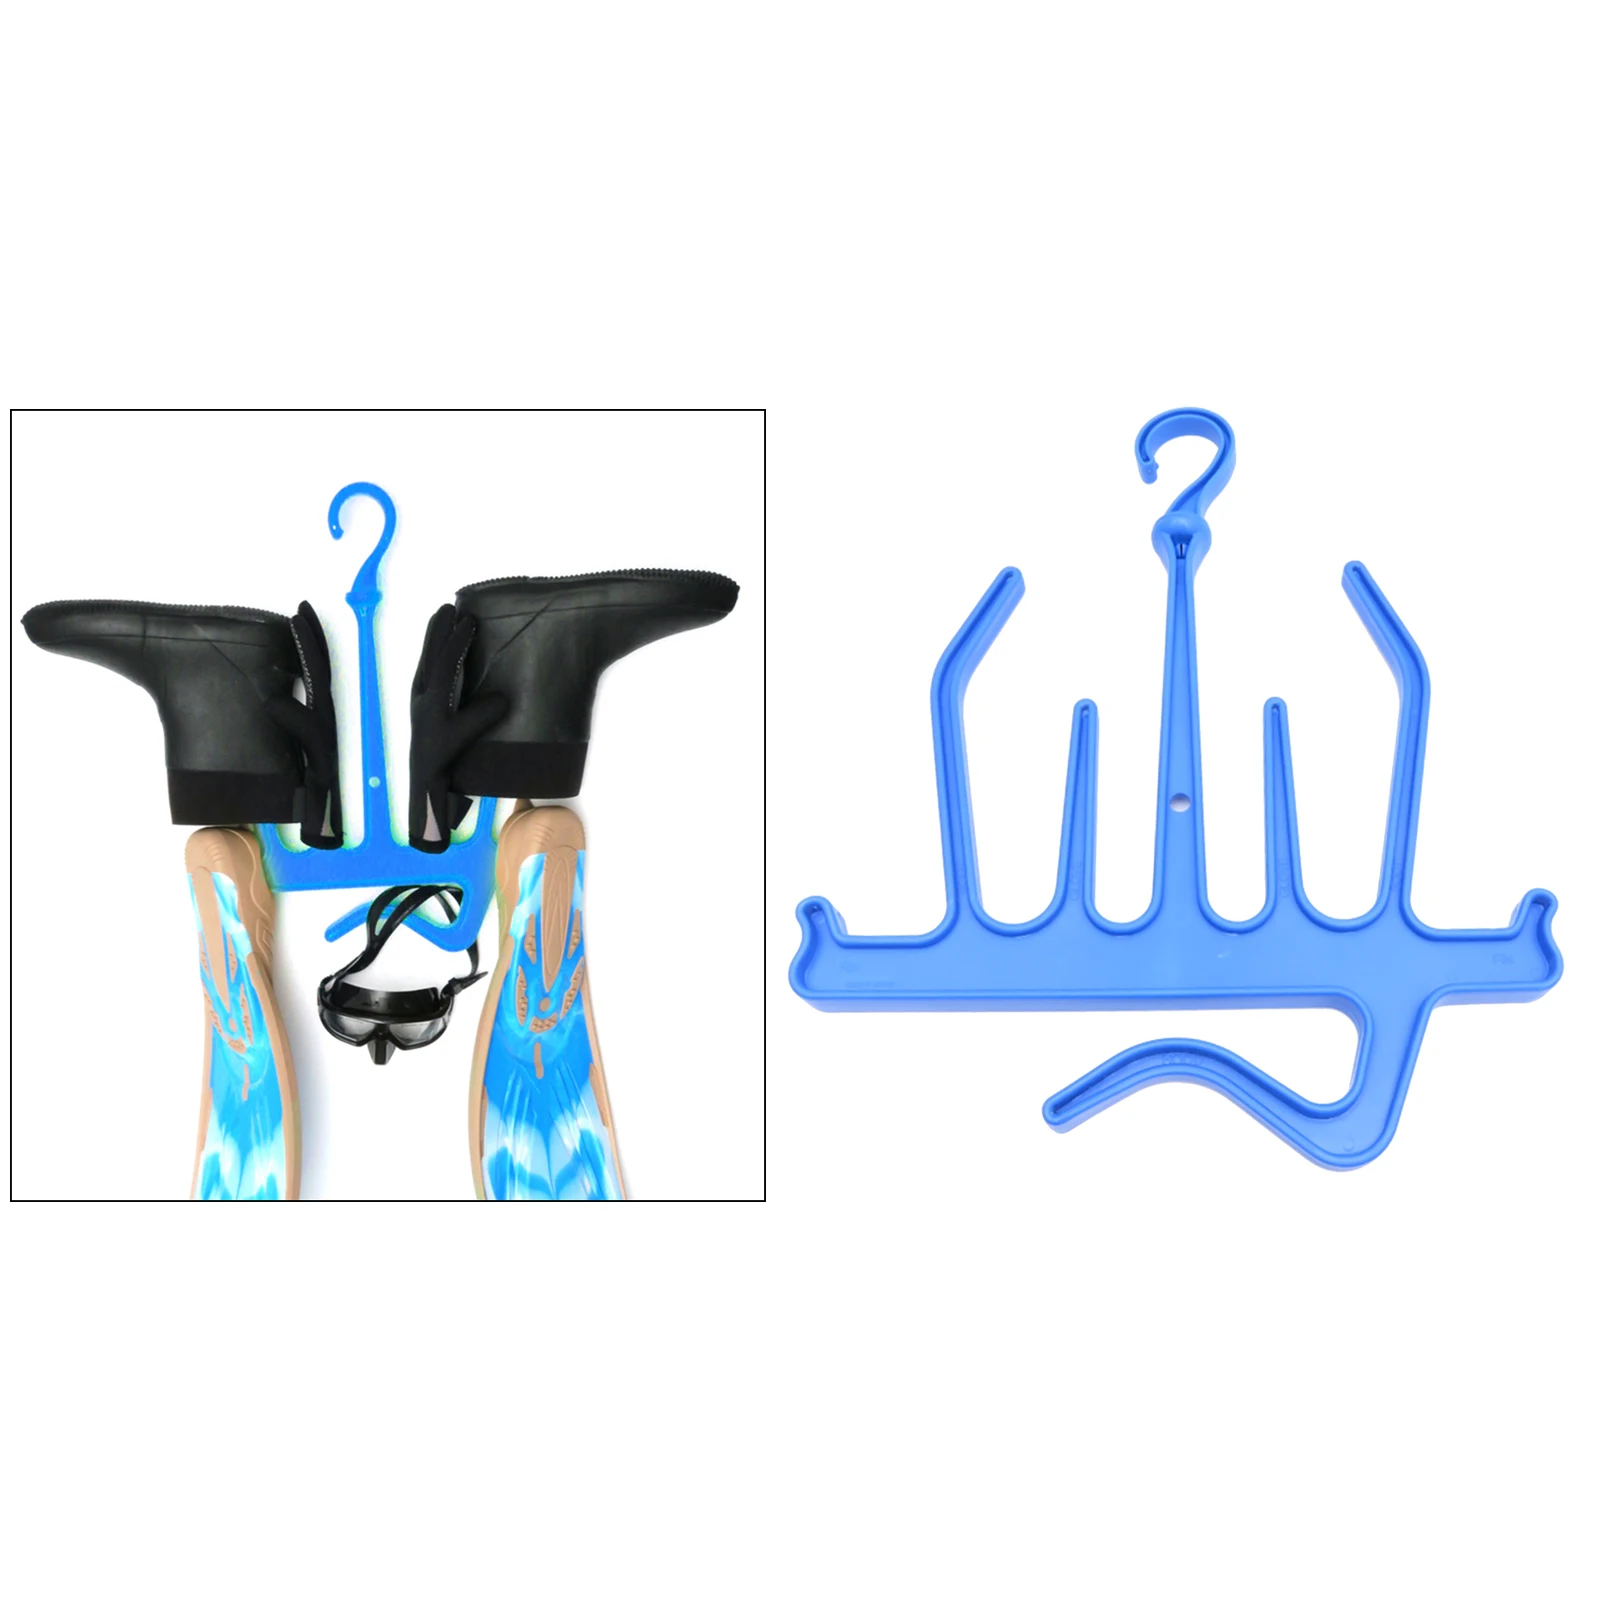 Multifunctional Scuba Gear Wetsuit Hanger Fast Drying Draining Snorkel Surfing Accessories